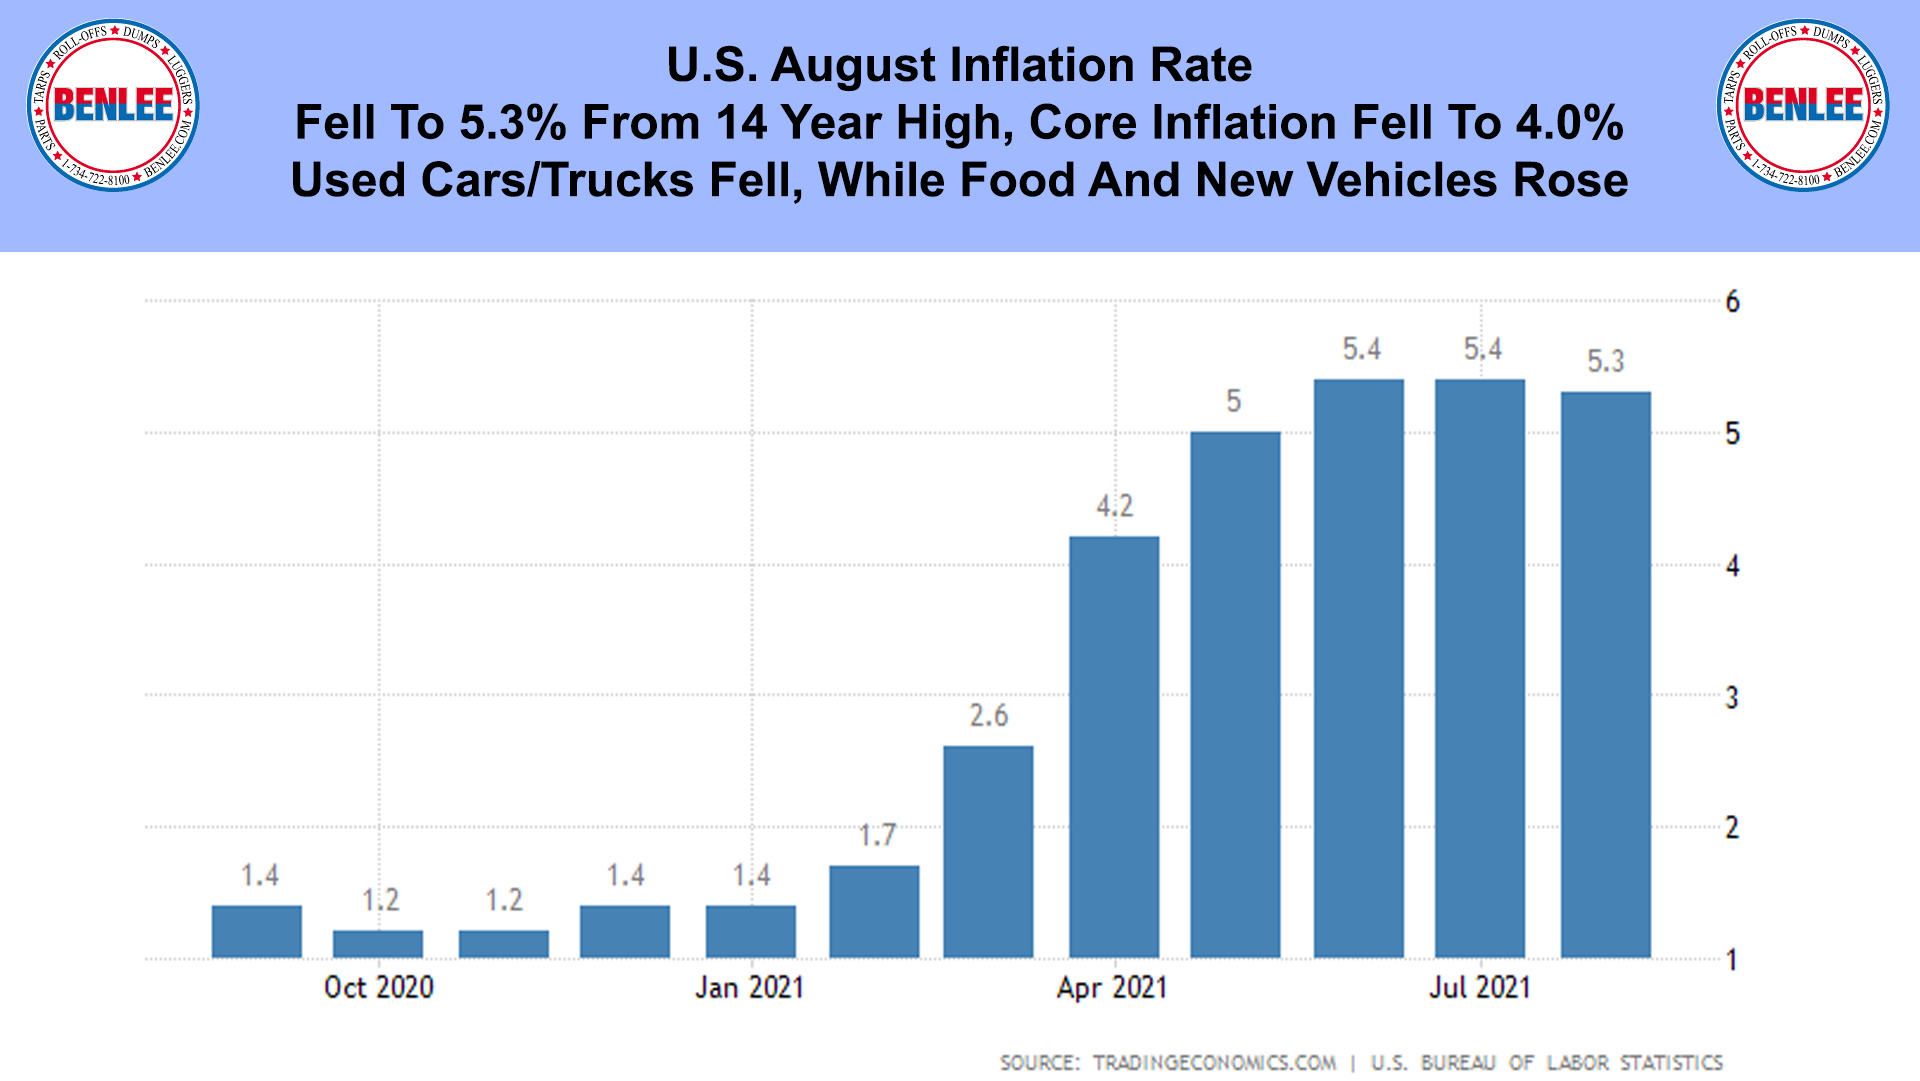 U.S. August Inflation Rate